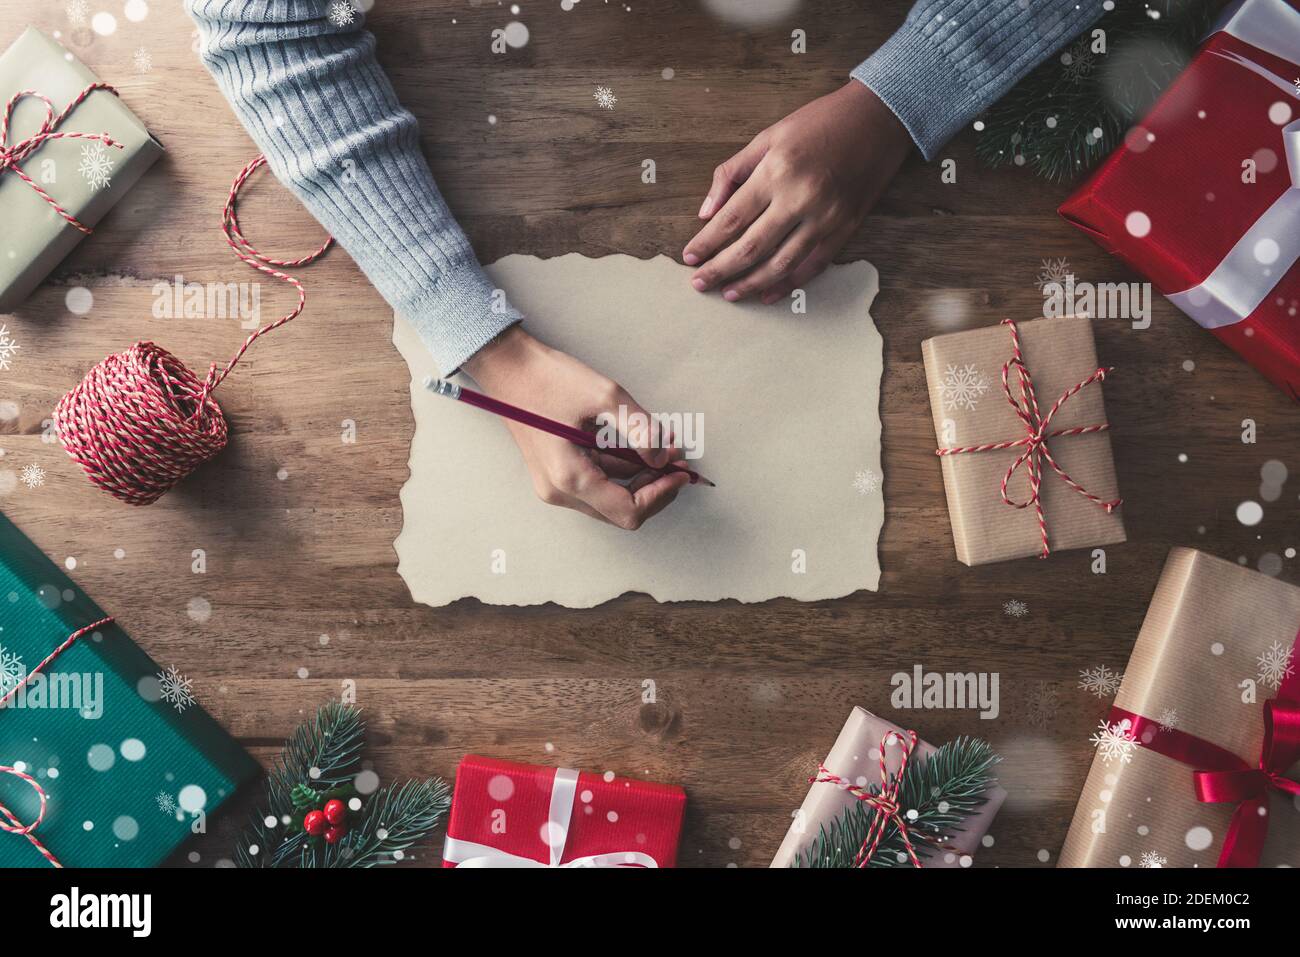 Woman in a gray sweater writing on craft paper with a red pencil in the center of christmas gifts on a wooden table with pine and mistletoe Stock Photo